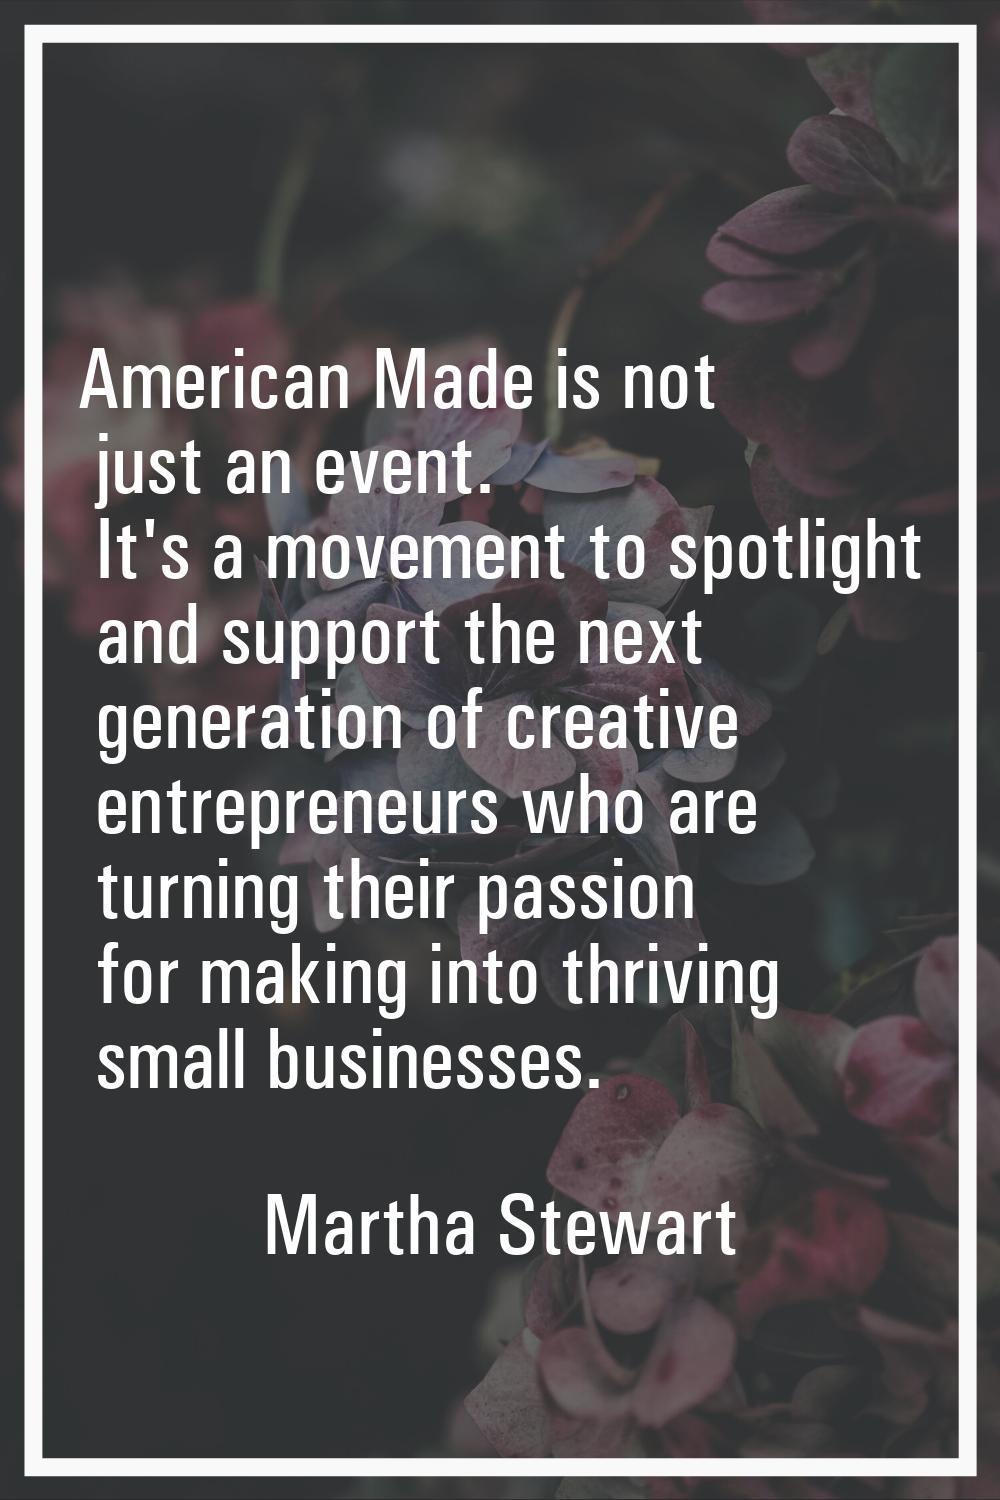 American Made is not just an event. It's a movement to spotlight and support the next generation of